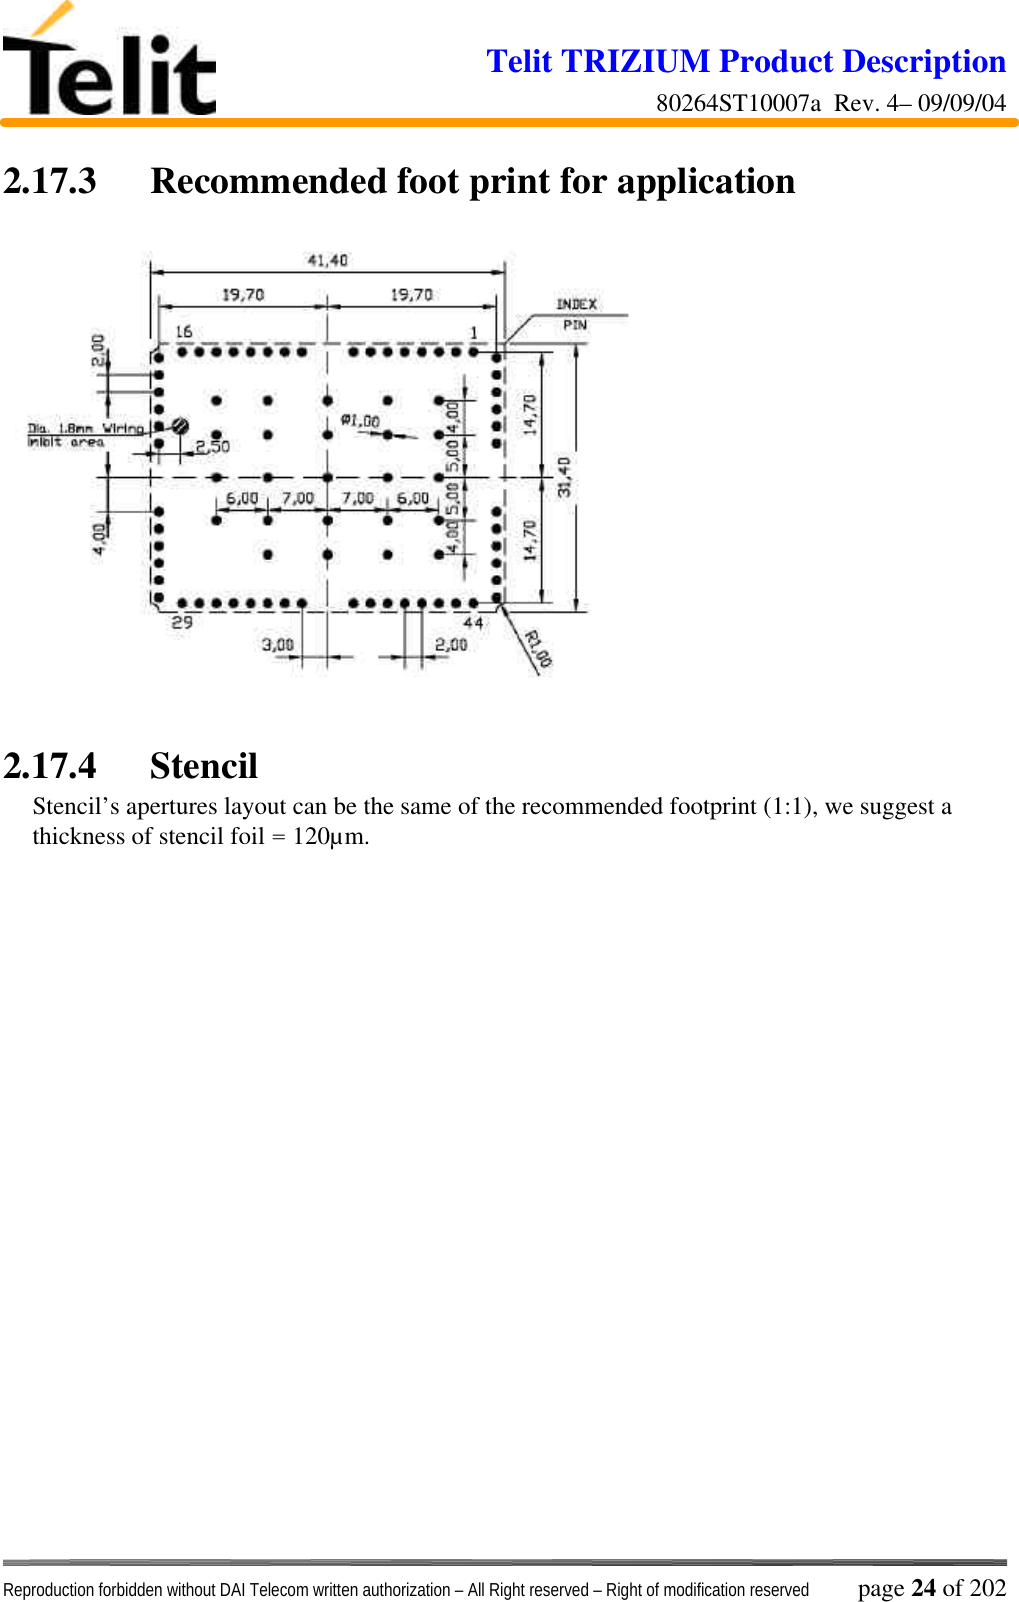 Telit TRIZIUM Product Description80264ST10007a  Rev. 4– 09/09/04Reproduction forbidden without DAI Telecom written authorization – All Right reserved – Right of modification reserved page 24 of 2022.17.3 Recommended foot print for application2.17.4 StencilStencil’s apertures layout can be the same of the recommended footprint (1:1), we suggest athickness of stencil foil = 120µm.